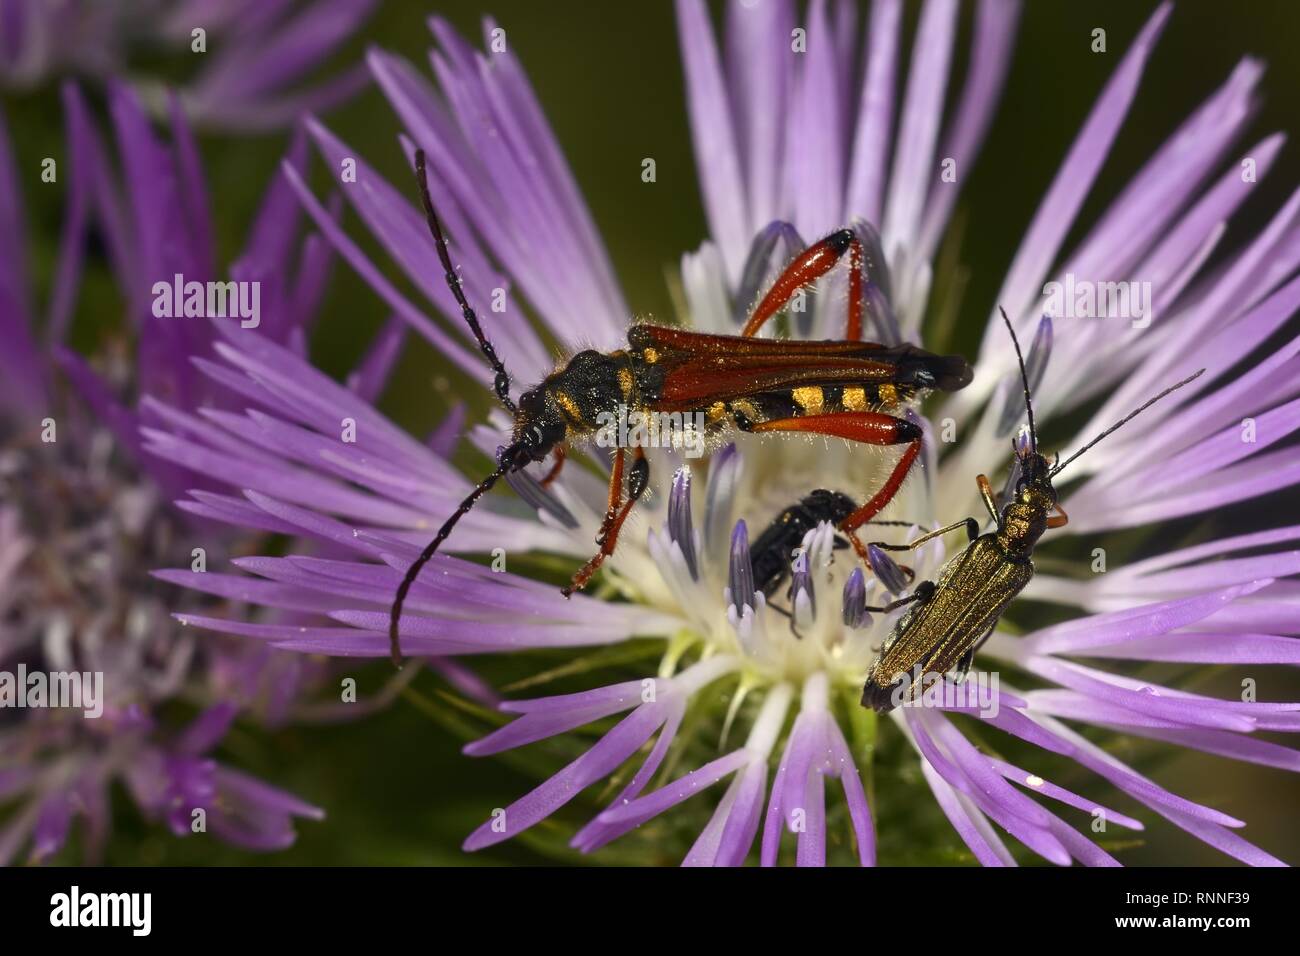 Longhorn Beetle (Stenopterus rufus), with Thick-legged flower beetle (Oedemera nobilis), female, on purple flower of a thistle Stock Photo